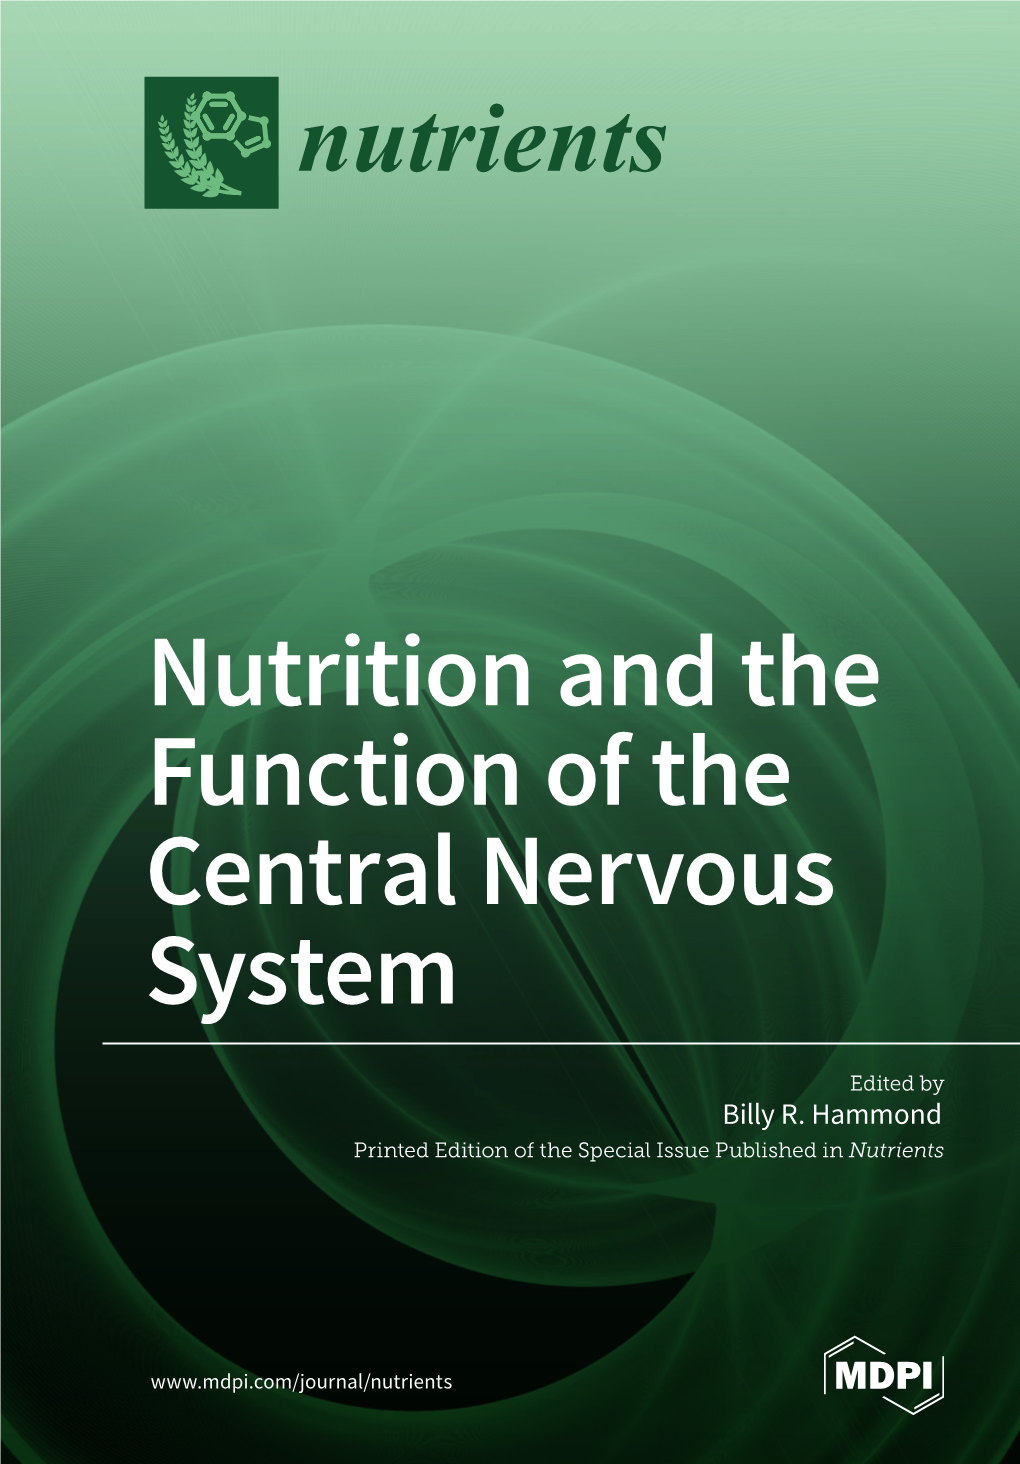 Nutrition and the Function of the Central Nervous System